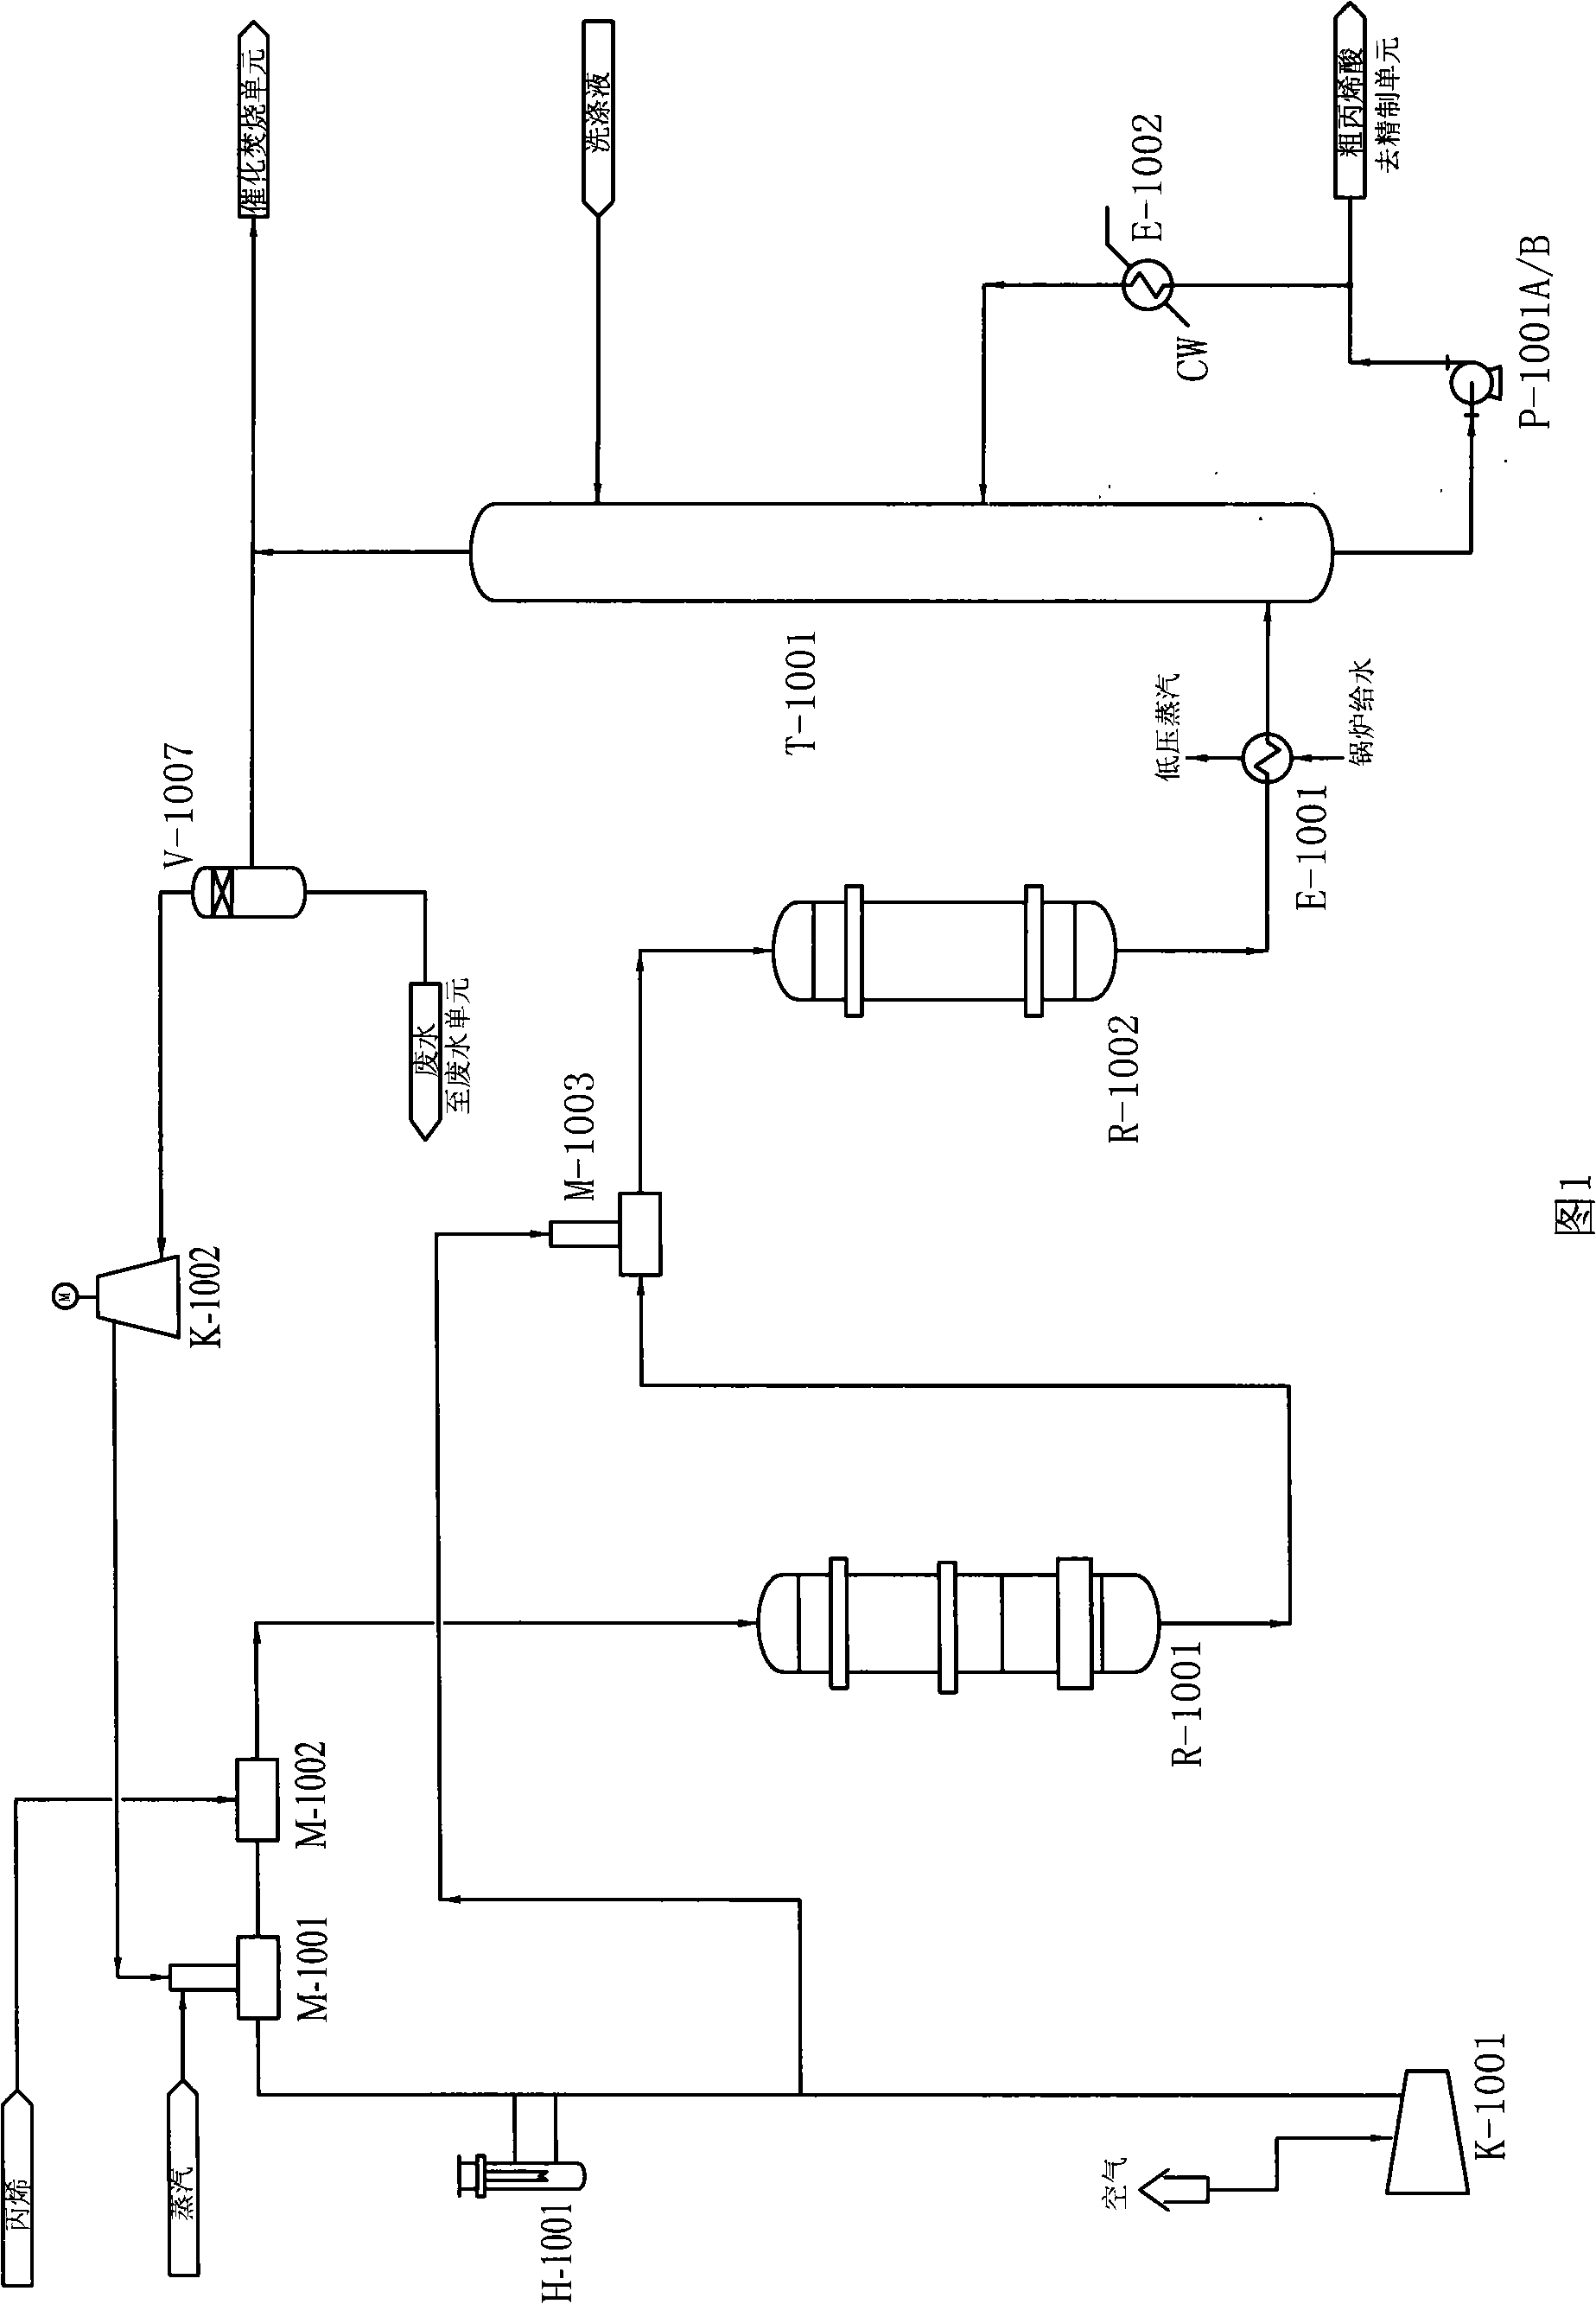 Modified technique for preparing acrylic acid by propylene two-step oxygenation method